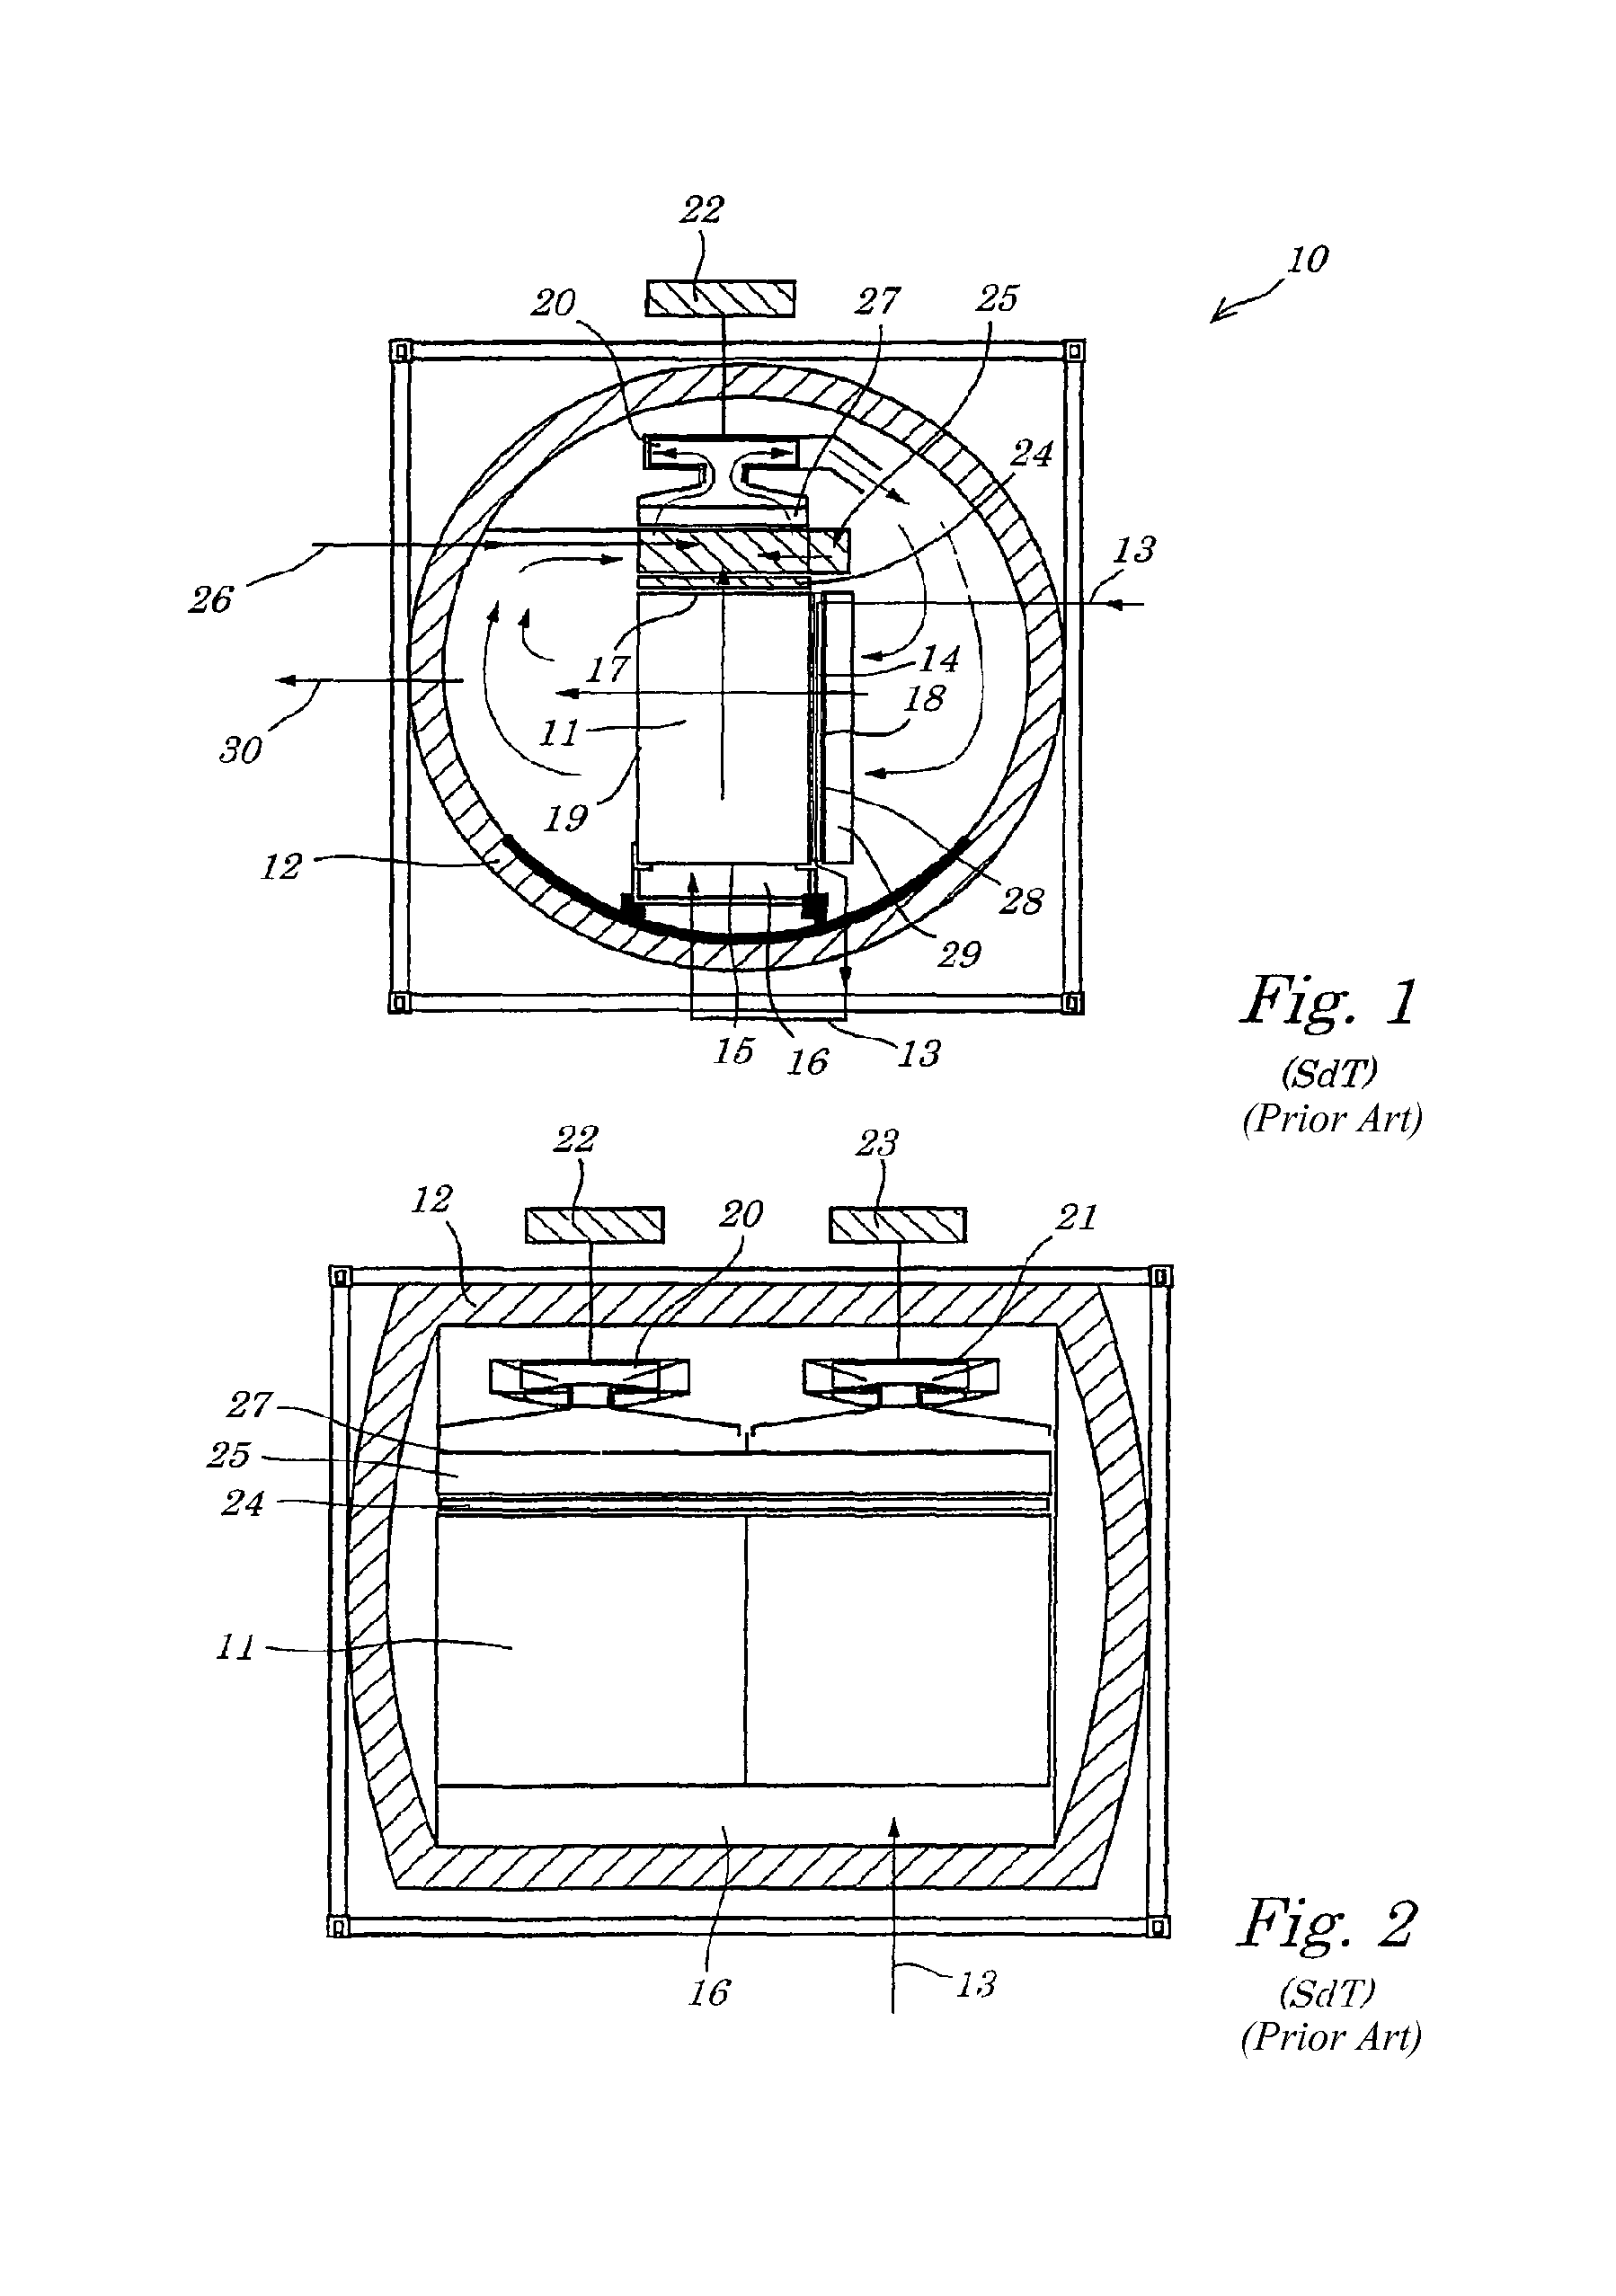 Fuel cell assembly comprising an improved catalytic burner